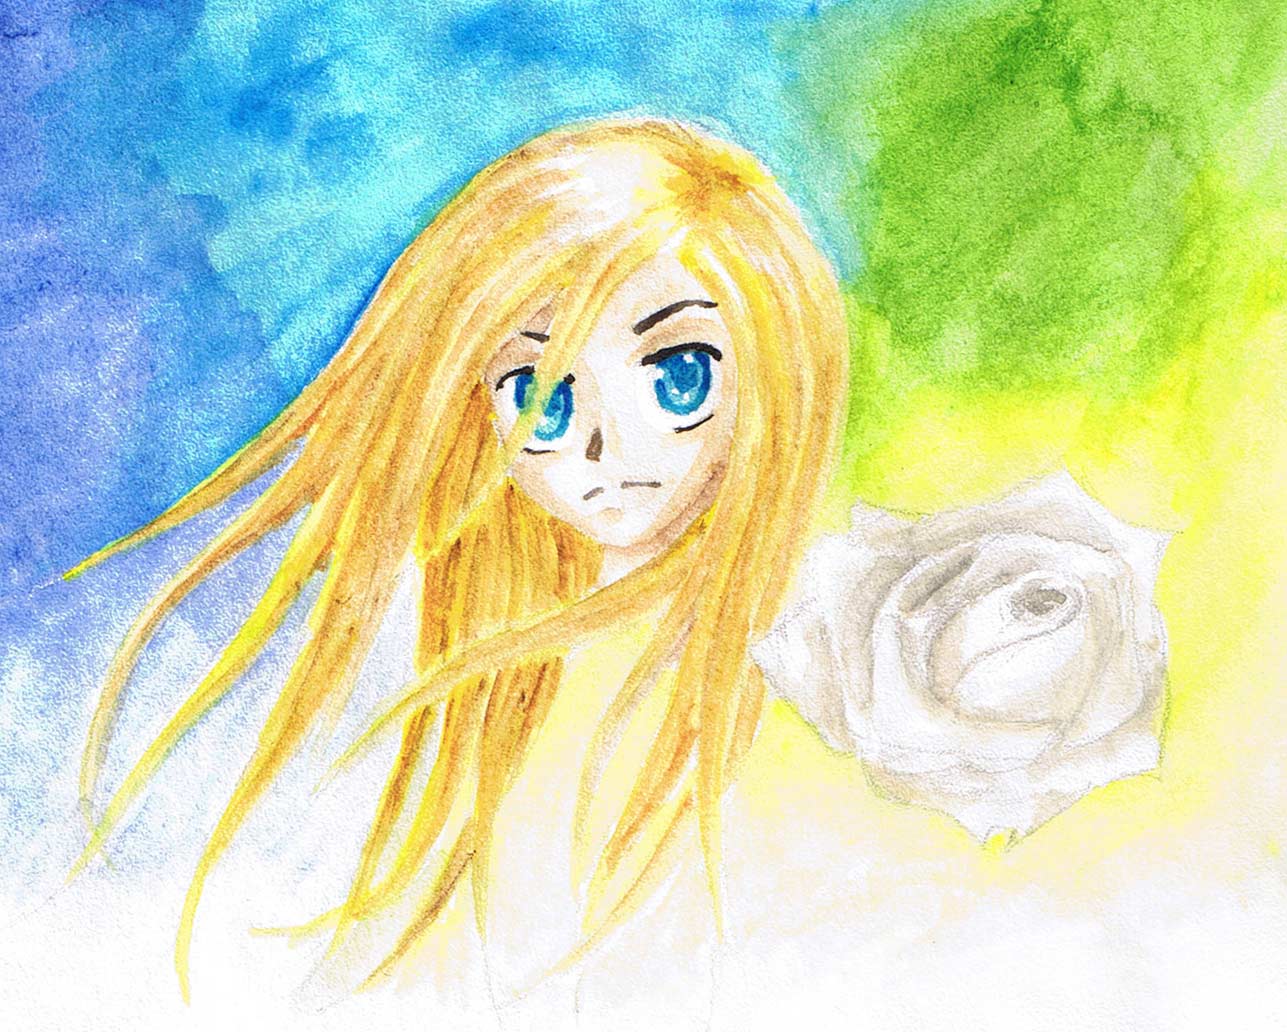 Golden Hair and the White Rose by Pabbit_da_Rabbit